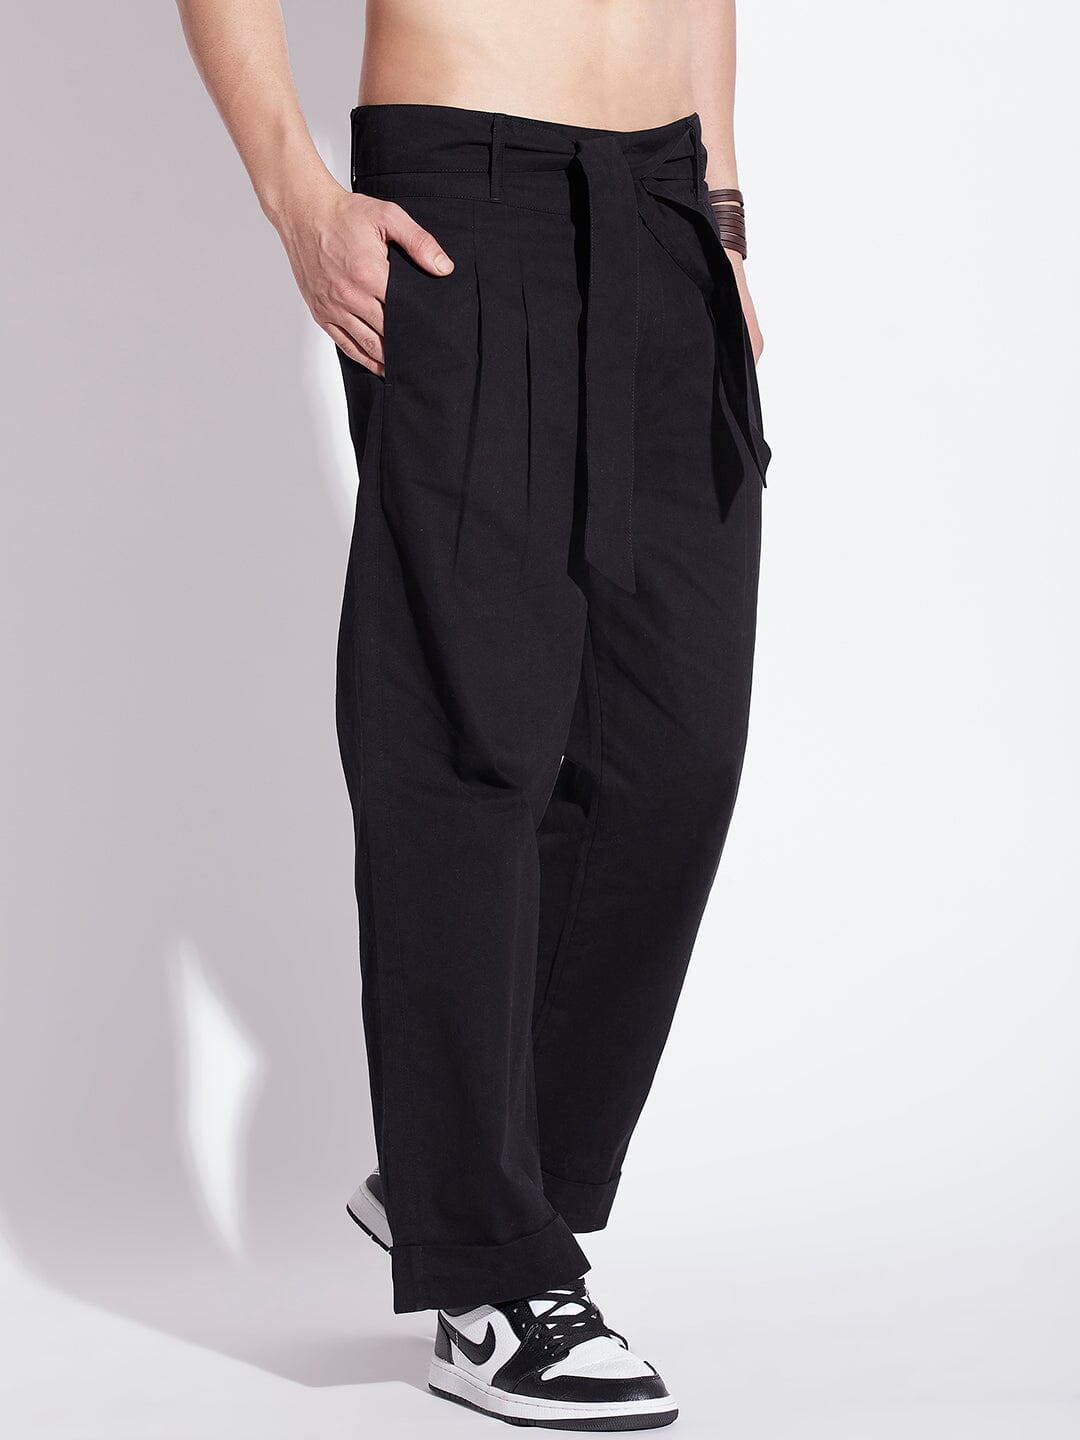 Garage High Rise Baggy Jeans in Black | Lyst